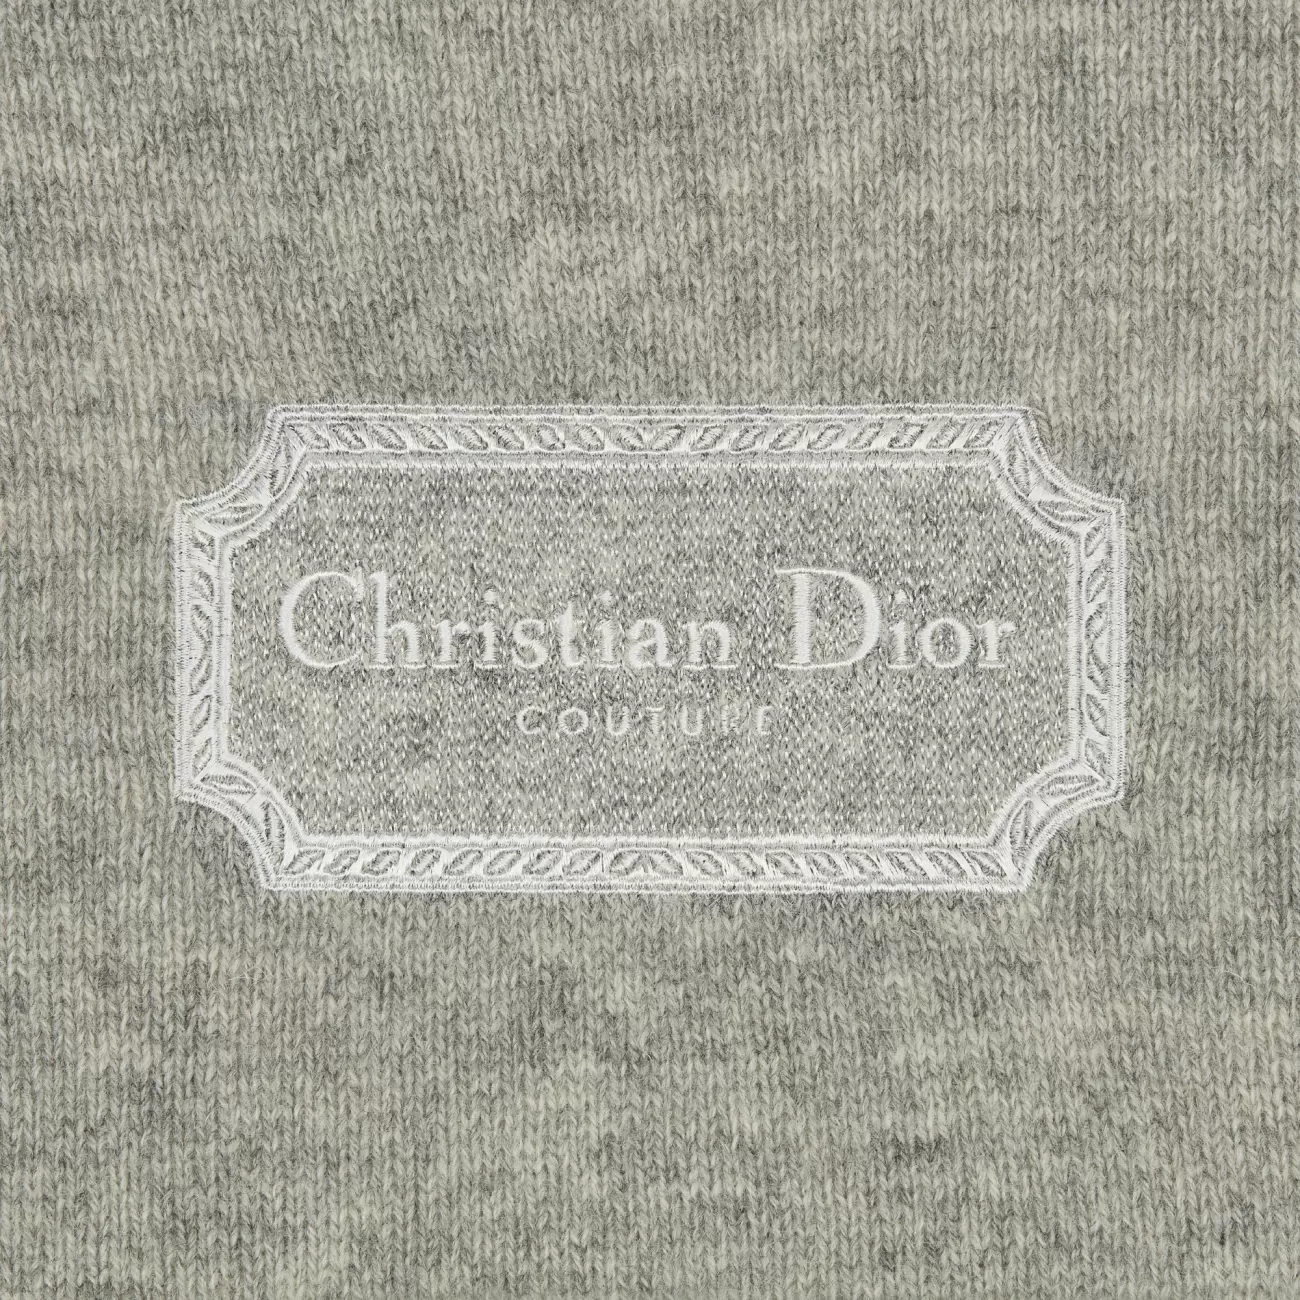 'CHRISTIAN DIOR COUTURE' SWEATER 